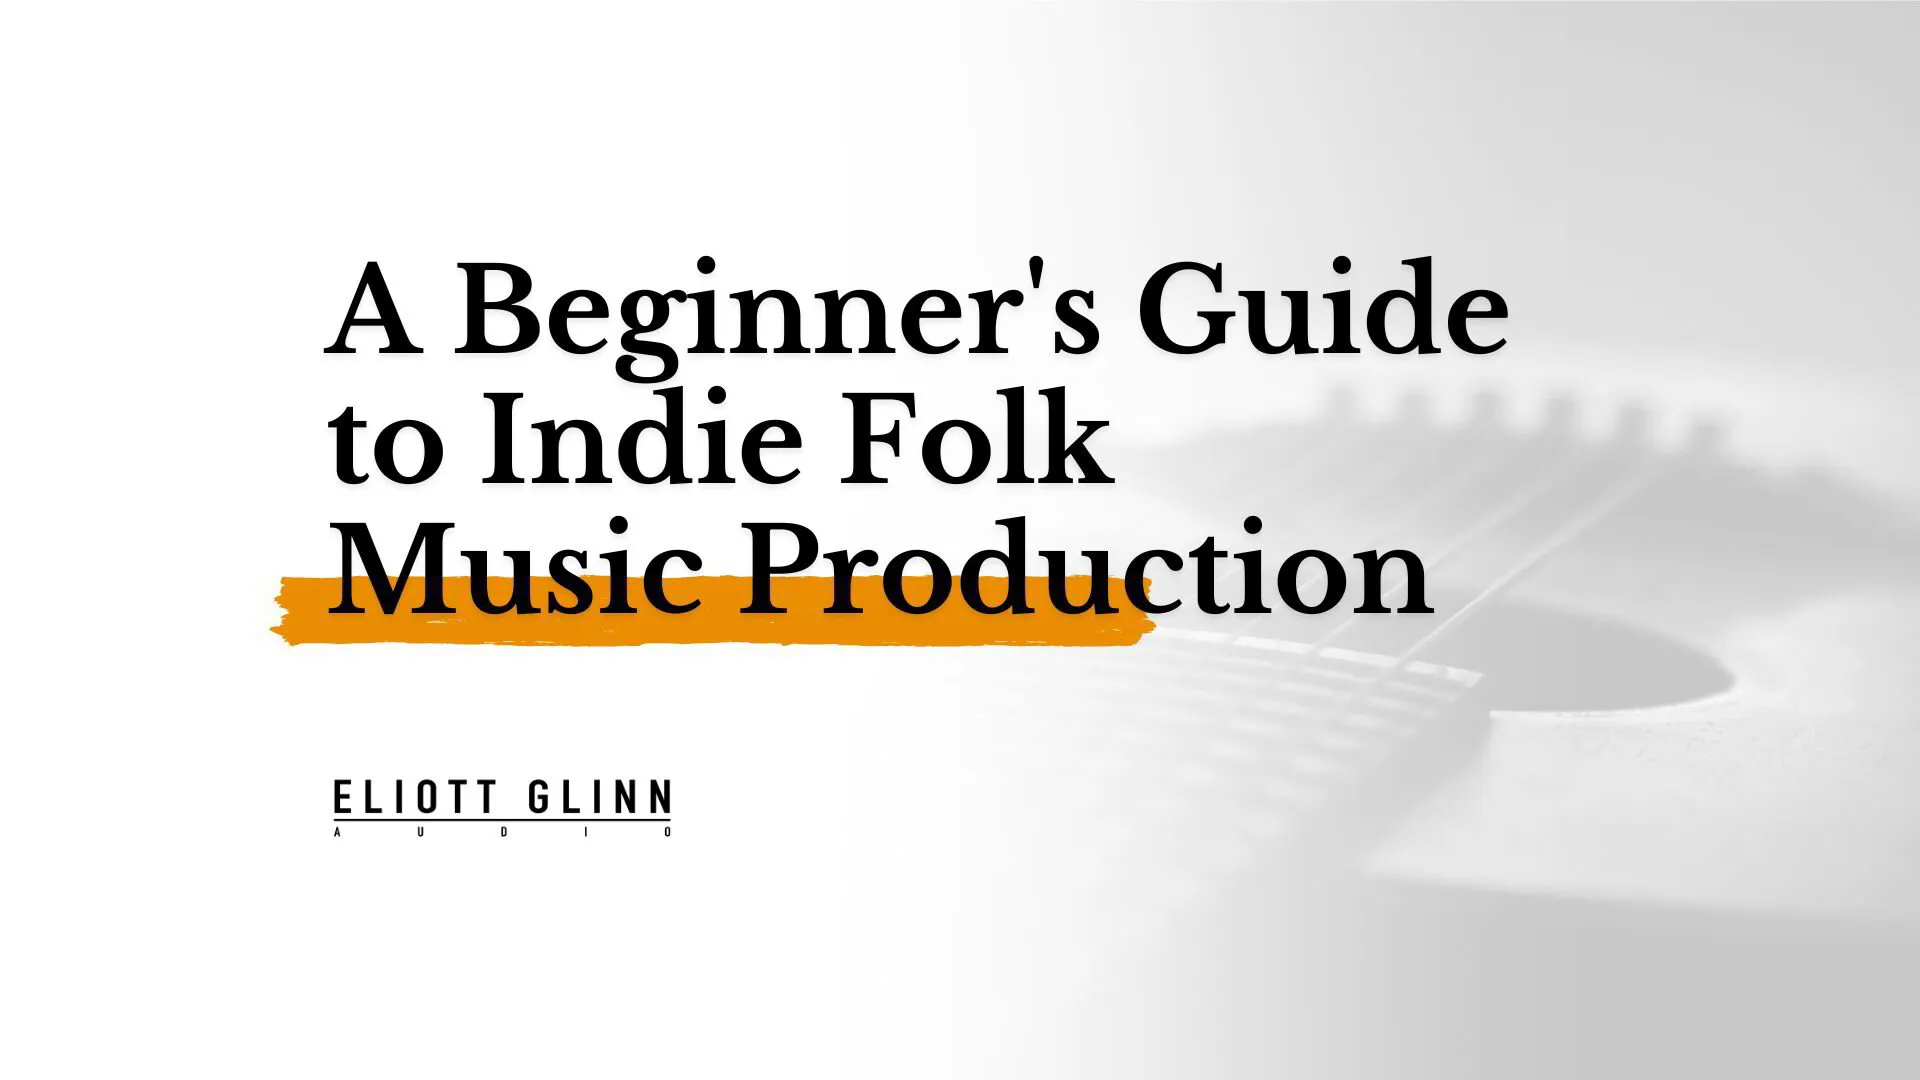 A Beginner's Guide to Indie Folk Music Production